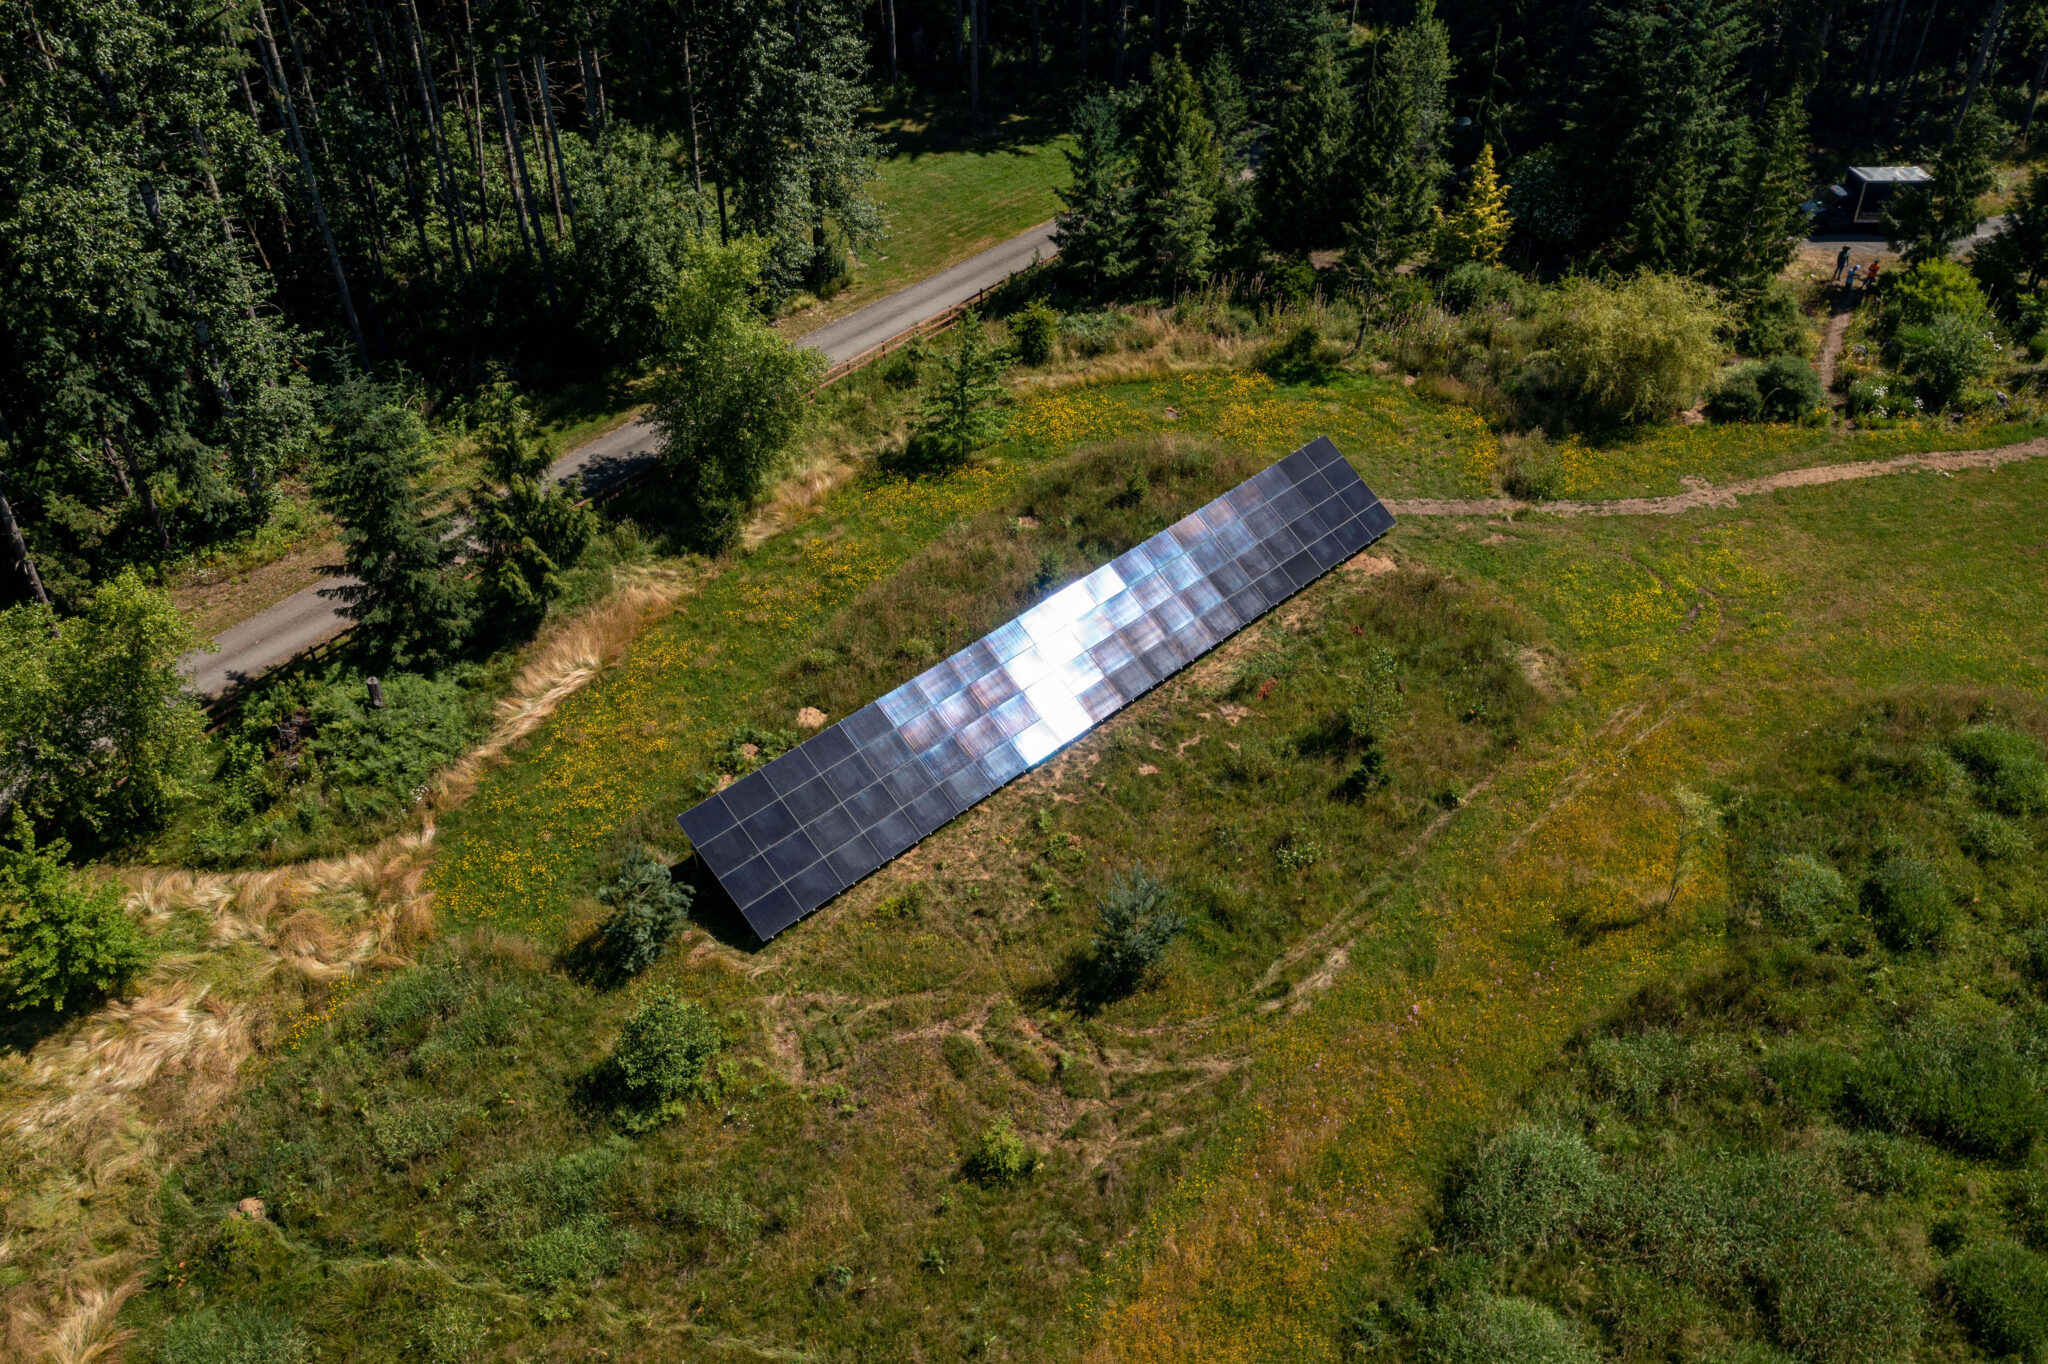 shimmering ground-mounted solar array installed with Solaria PowerXT panels.